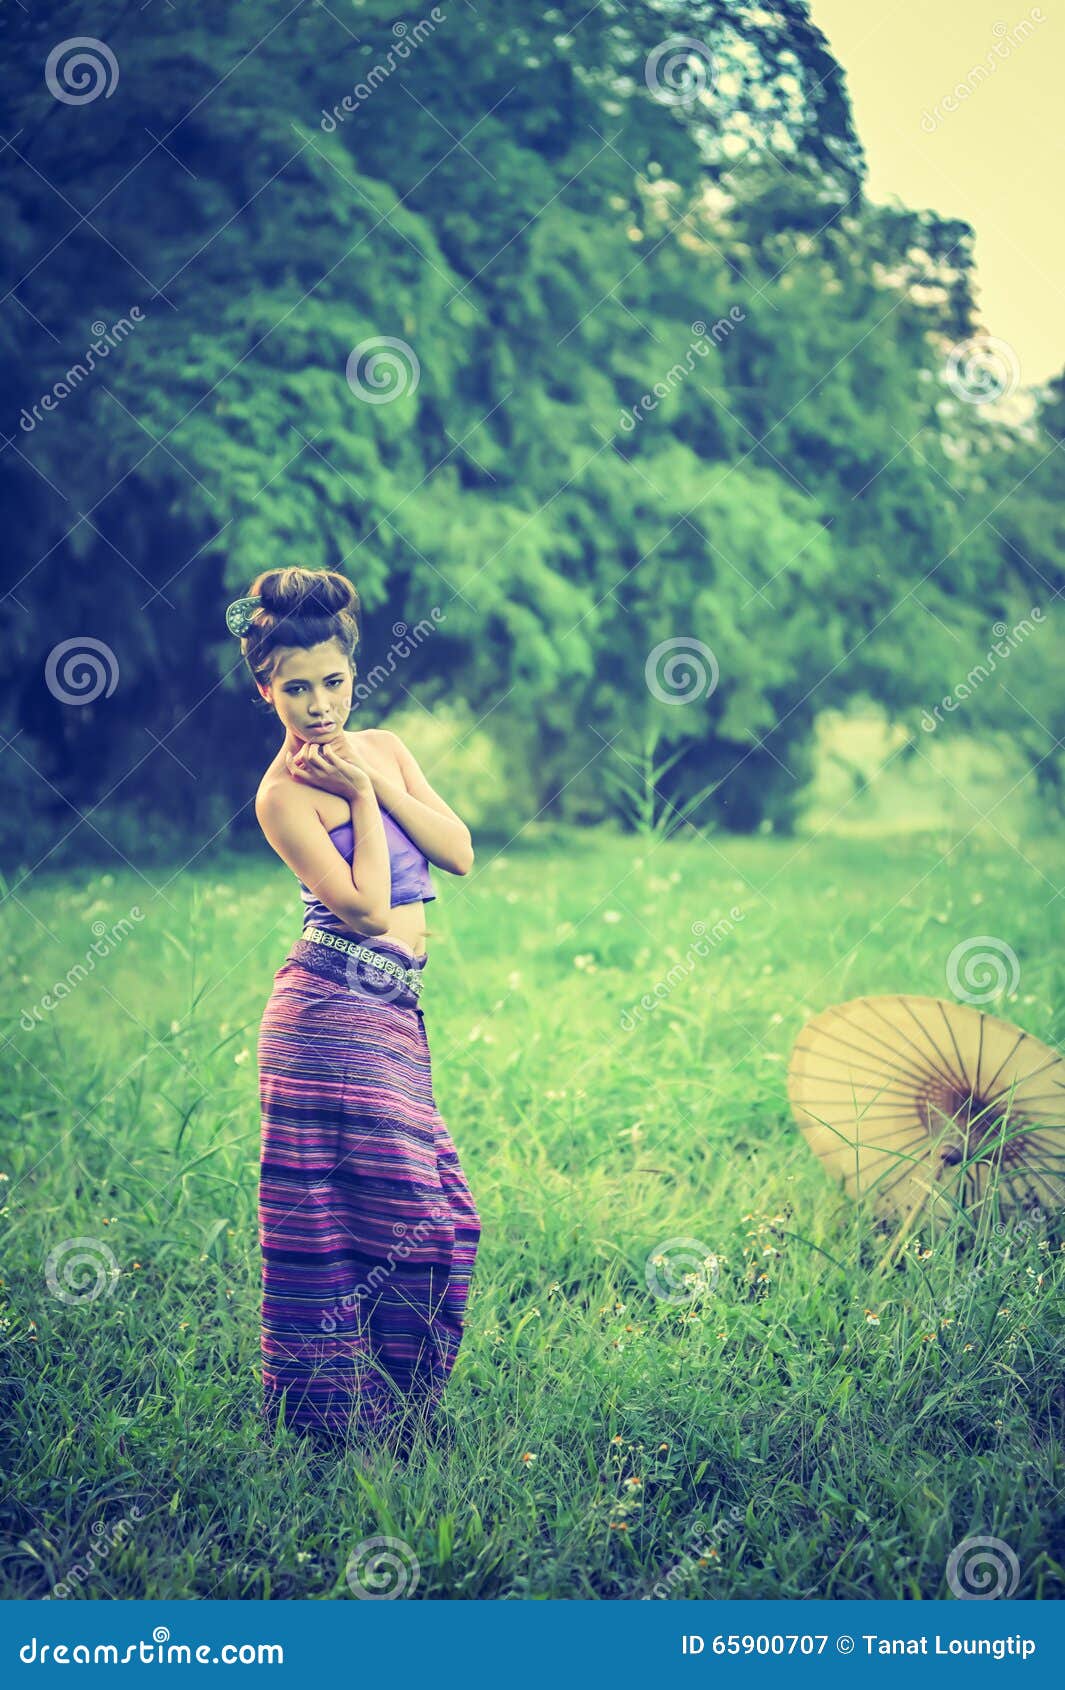 Asian Woman Wearing Thai Lanna Series Identity Culture Of Thailand Stock Image Image Of Life